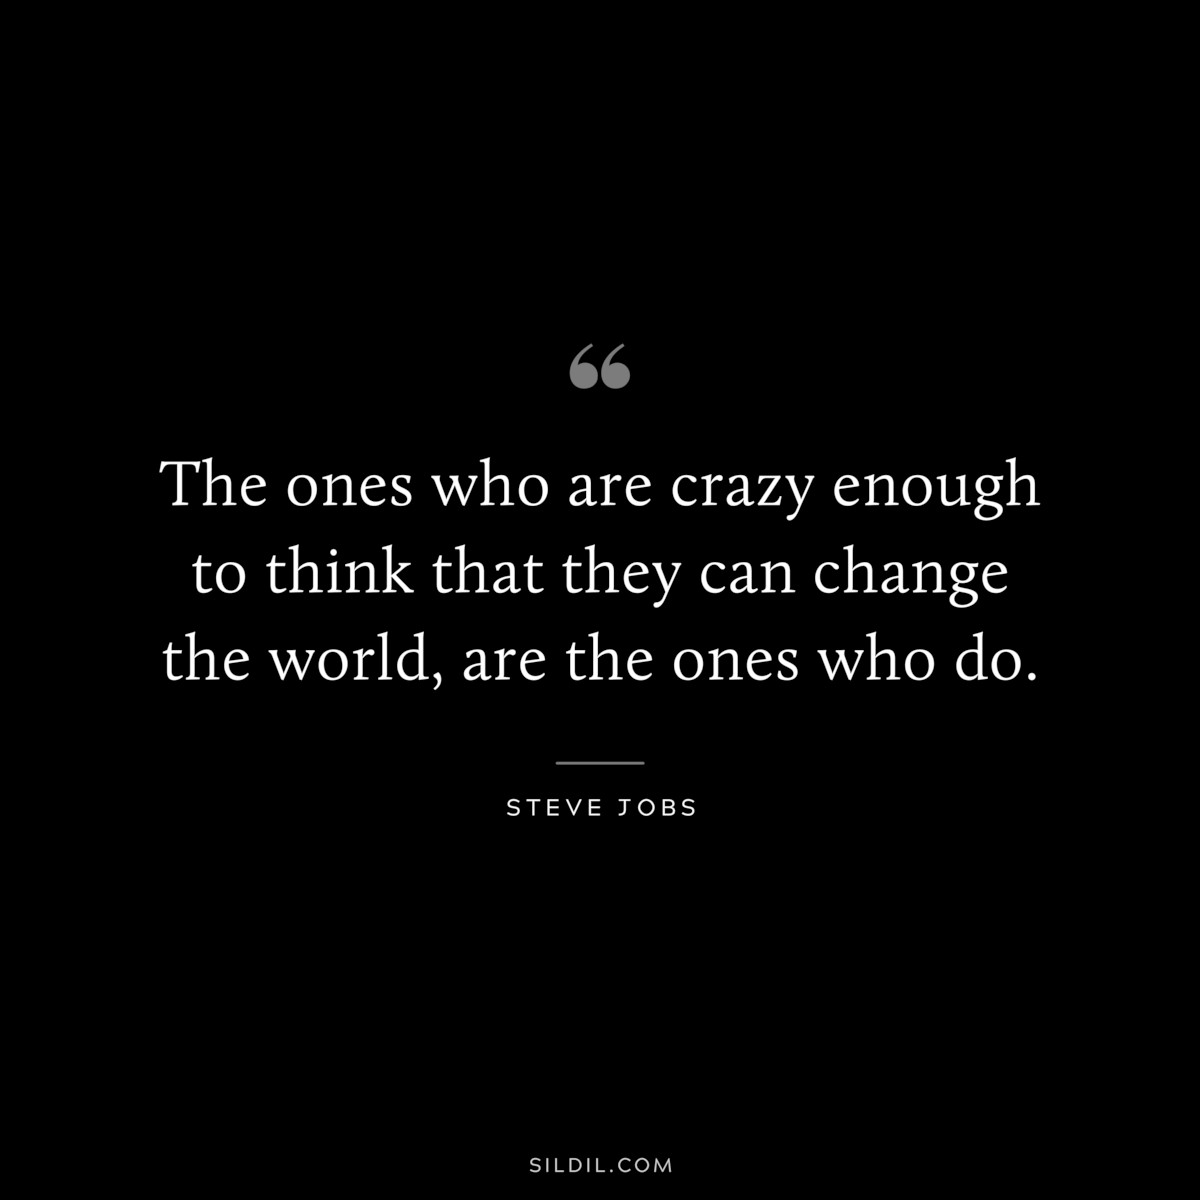 The ones who are crazy enough to think that they can change the world, are the ones who do. ― Steve Jobs